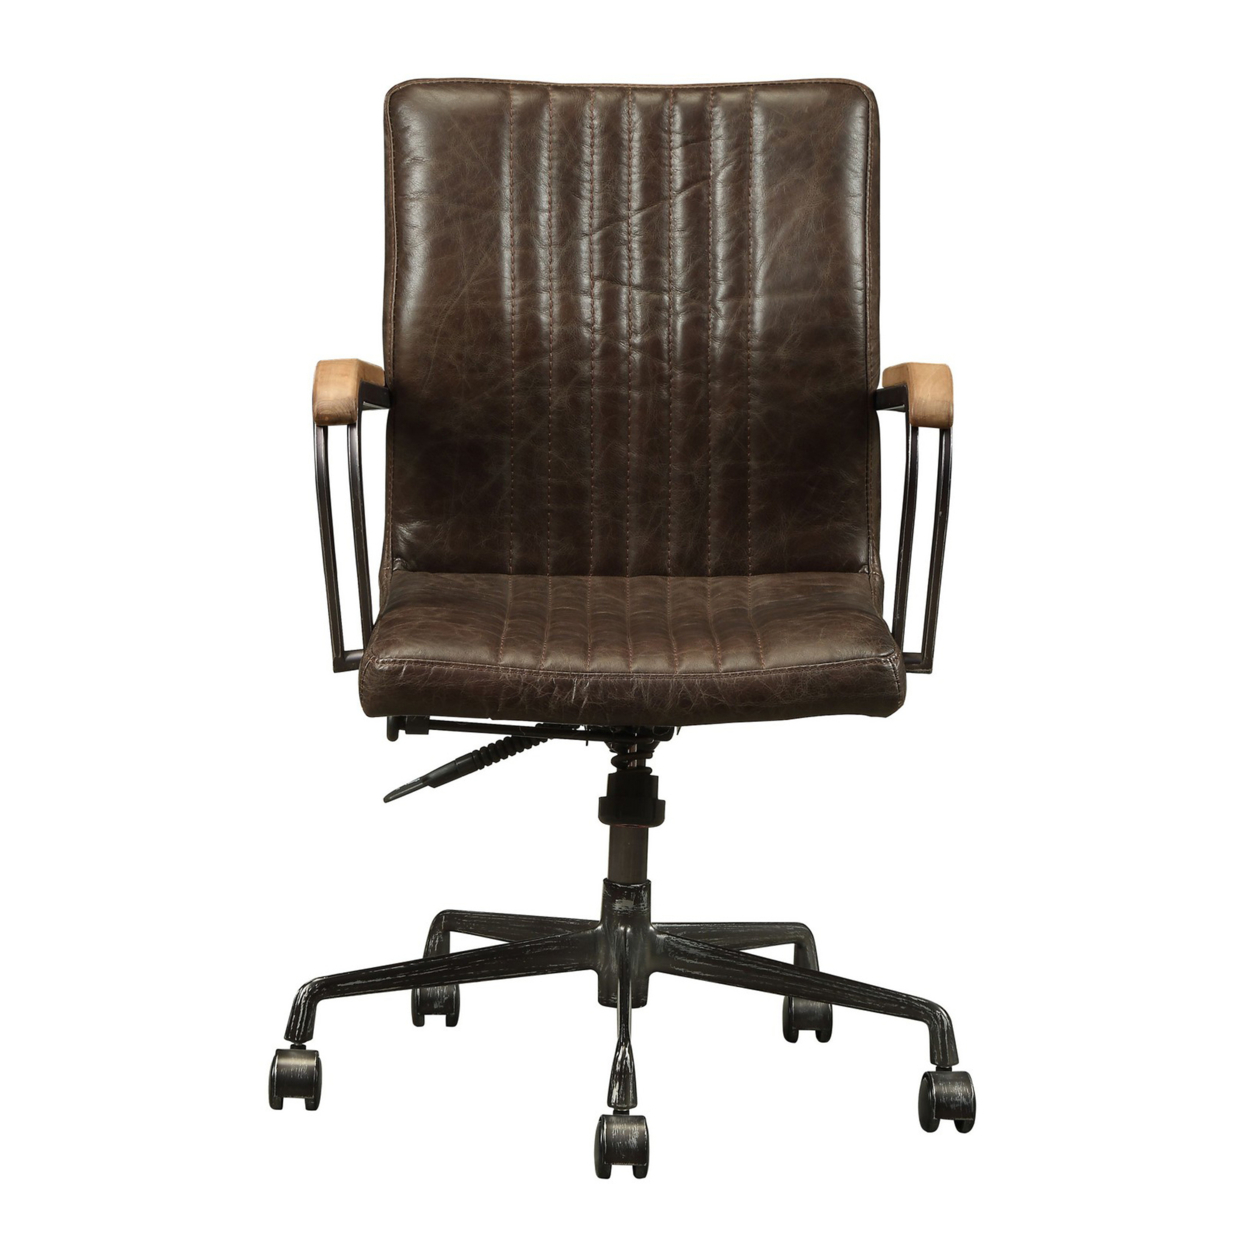 Leatherette Upholstered Metal Swivel Executive Chair With Curved Wooden Armrest, Brown And Black- Saltoro Sherpi